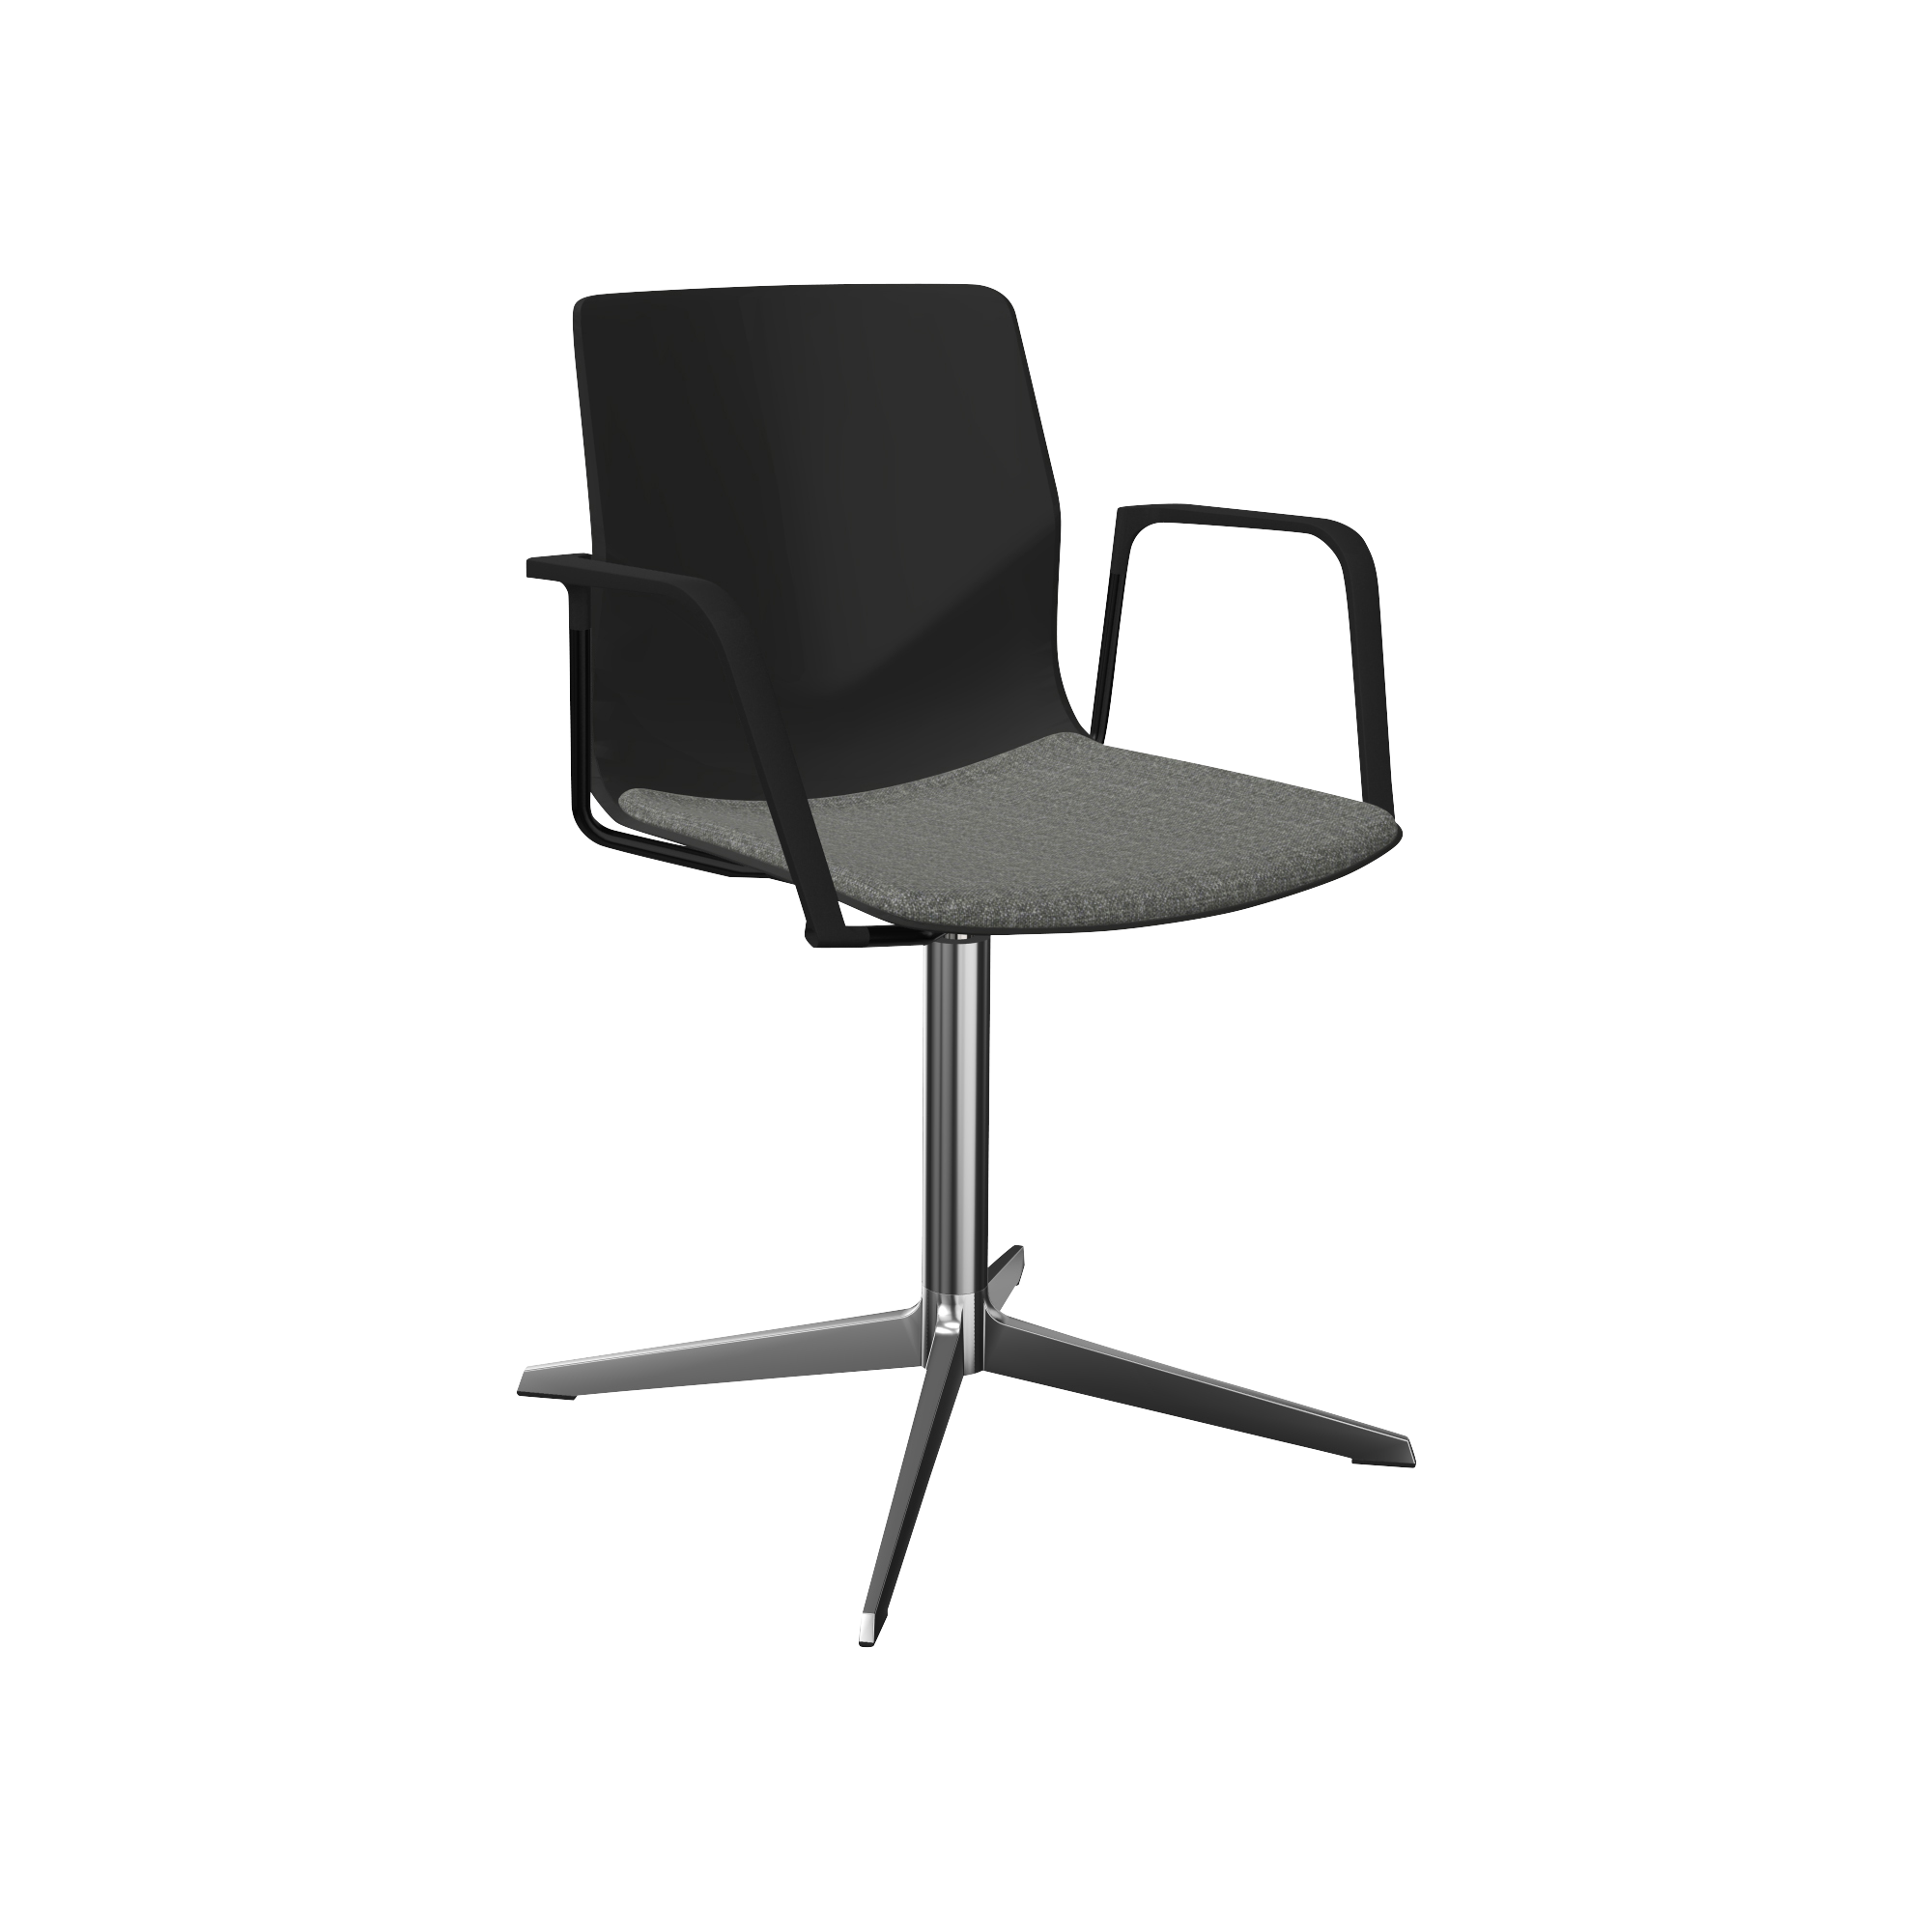 A black office chair with a chrome pedestal leg and arm rests